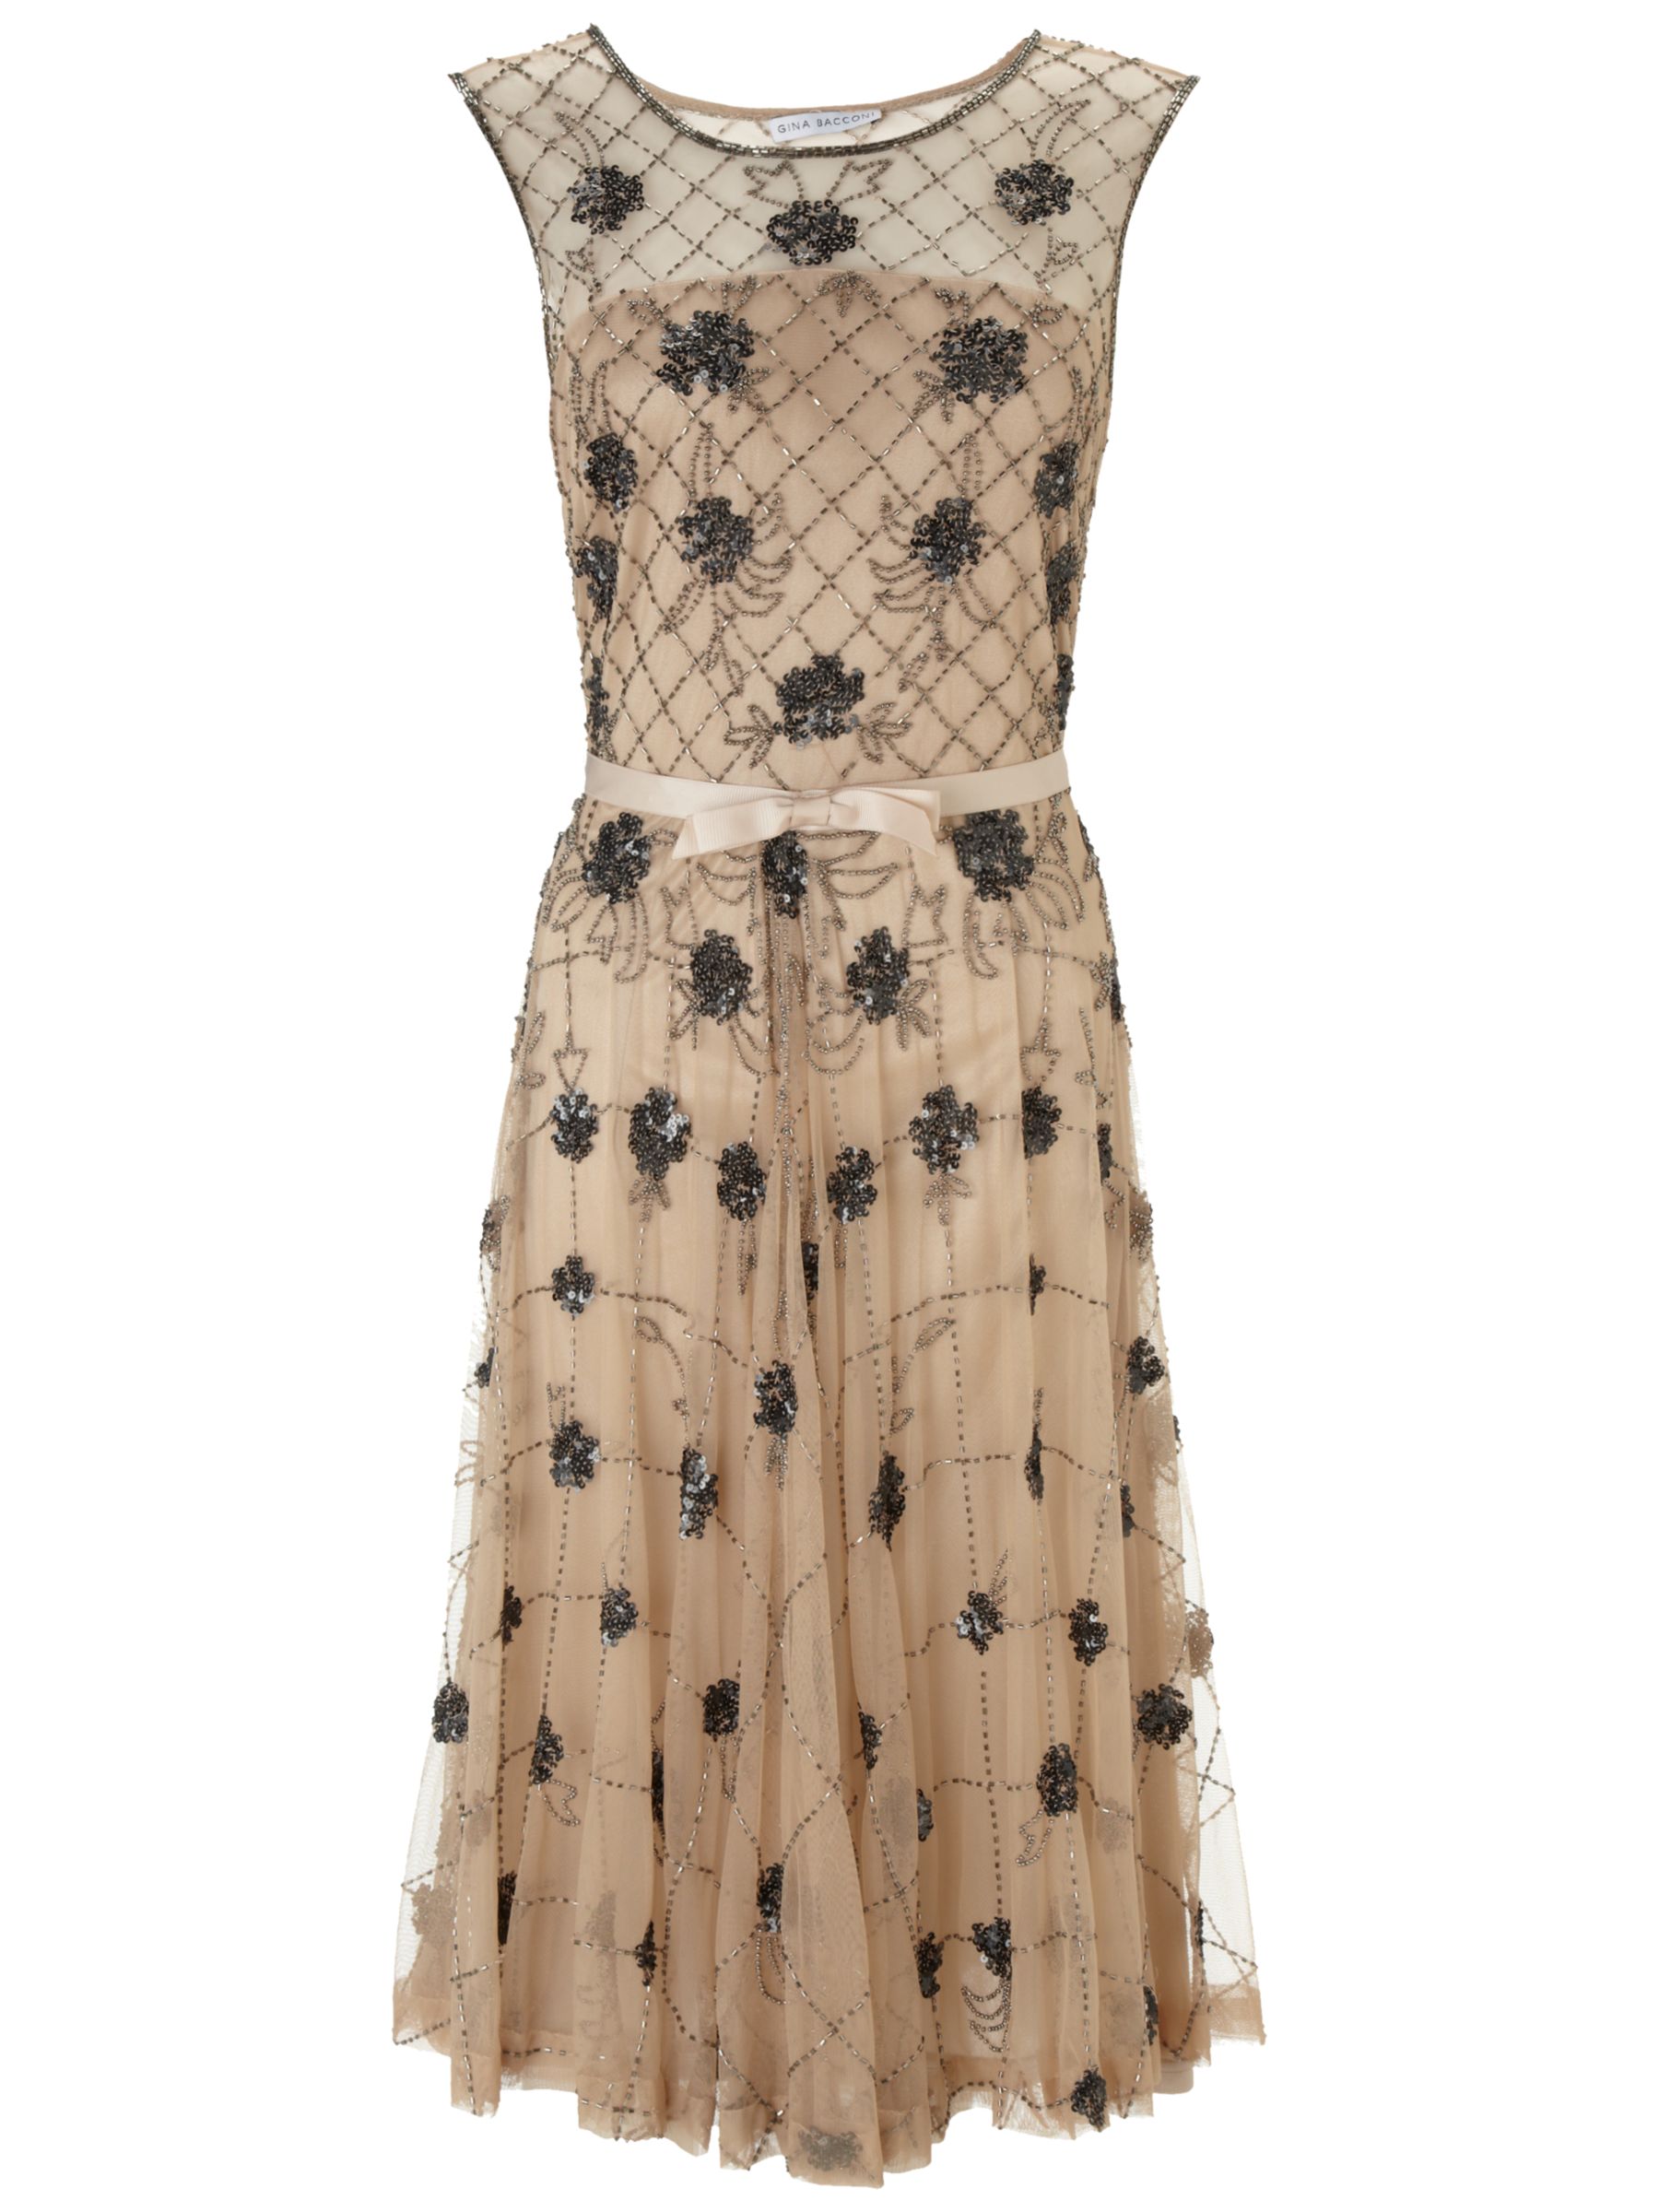 1920s Dresses for Sale in the UK photo picture